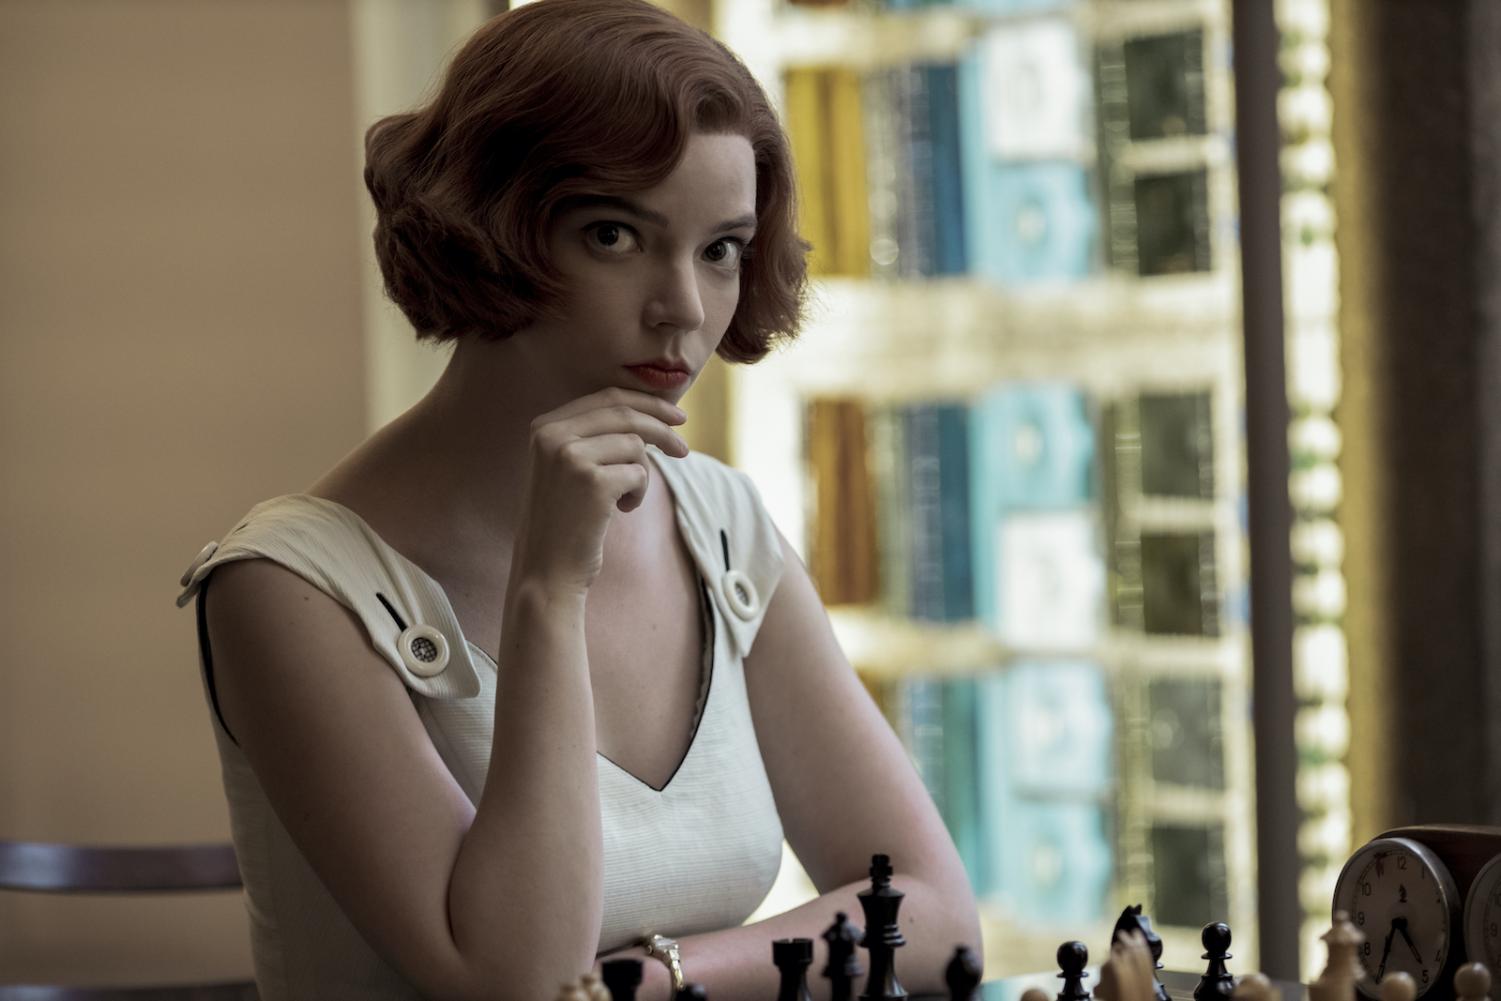 Checkmate: On The Queen's Gambit's Rise to Popularity and